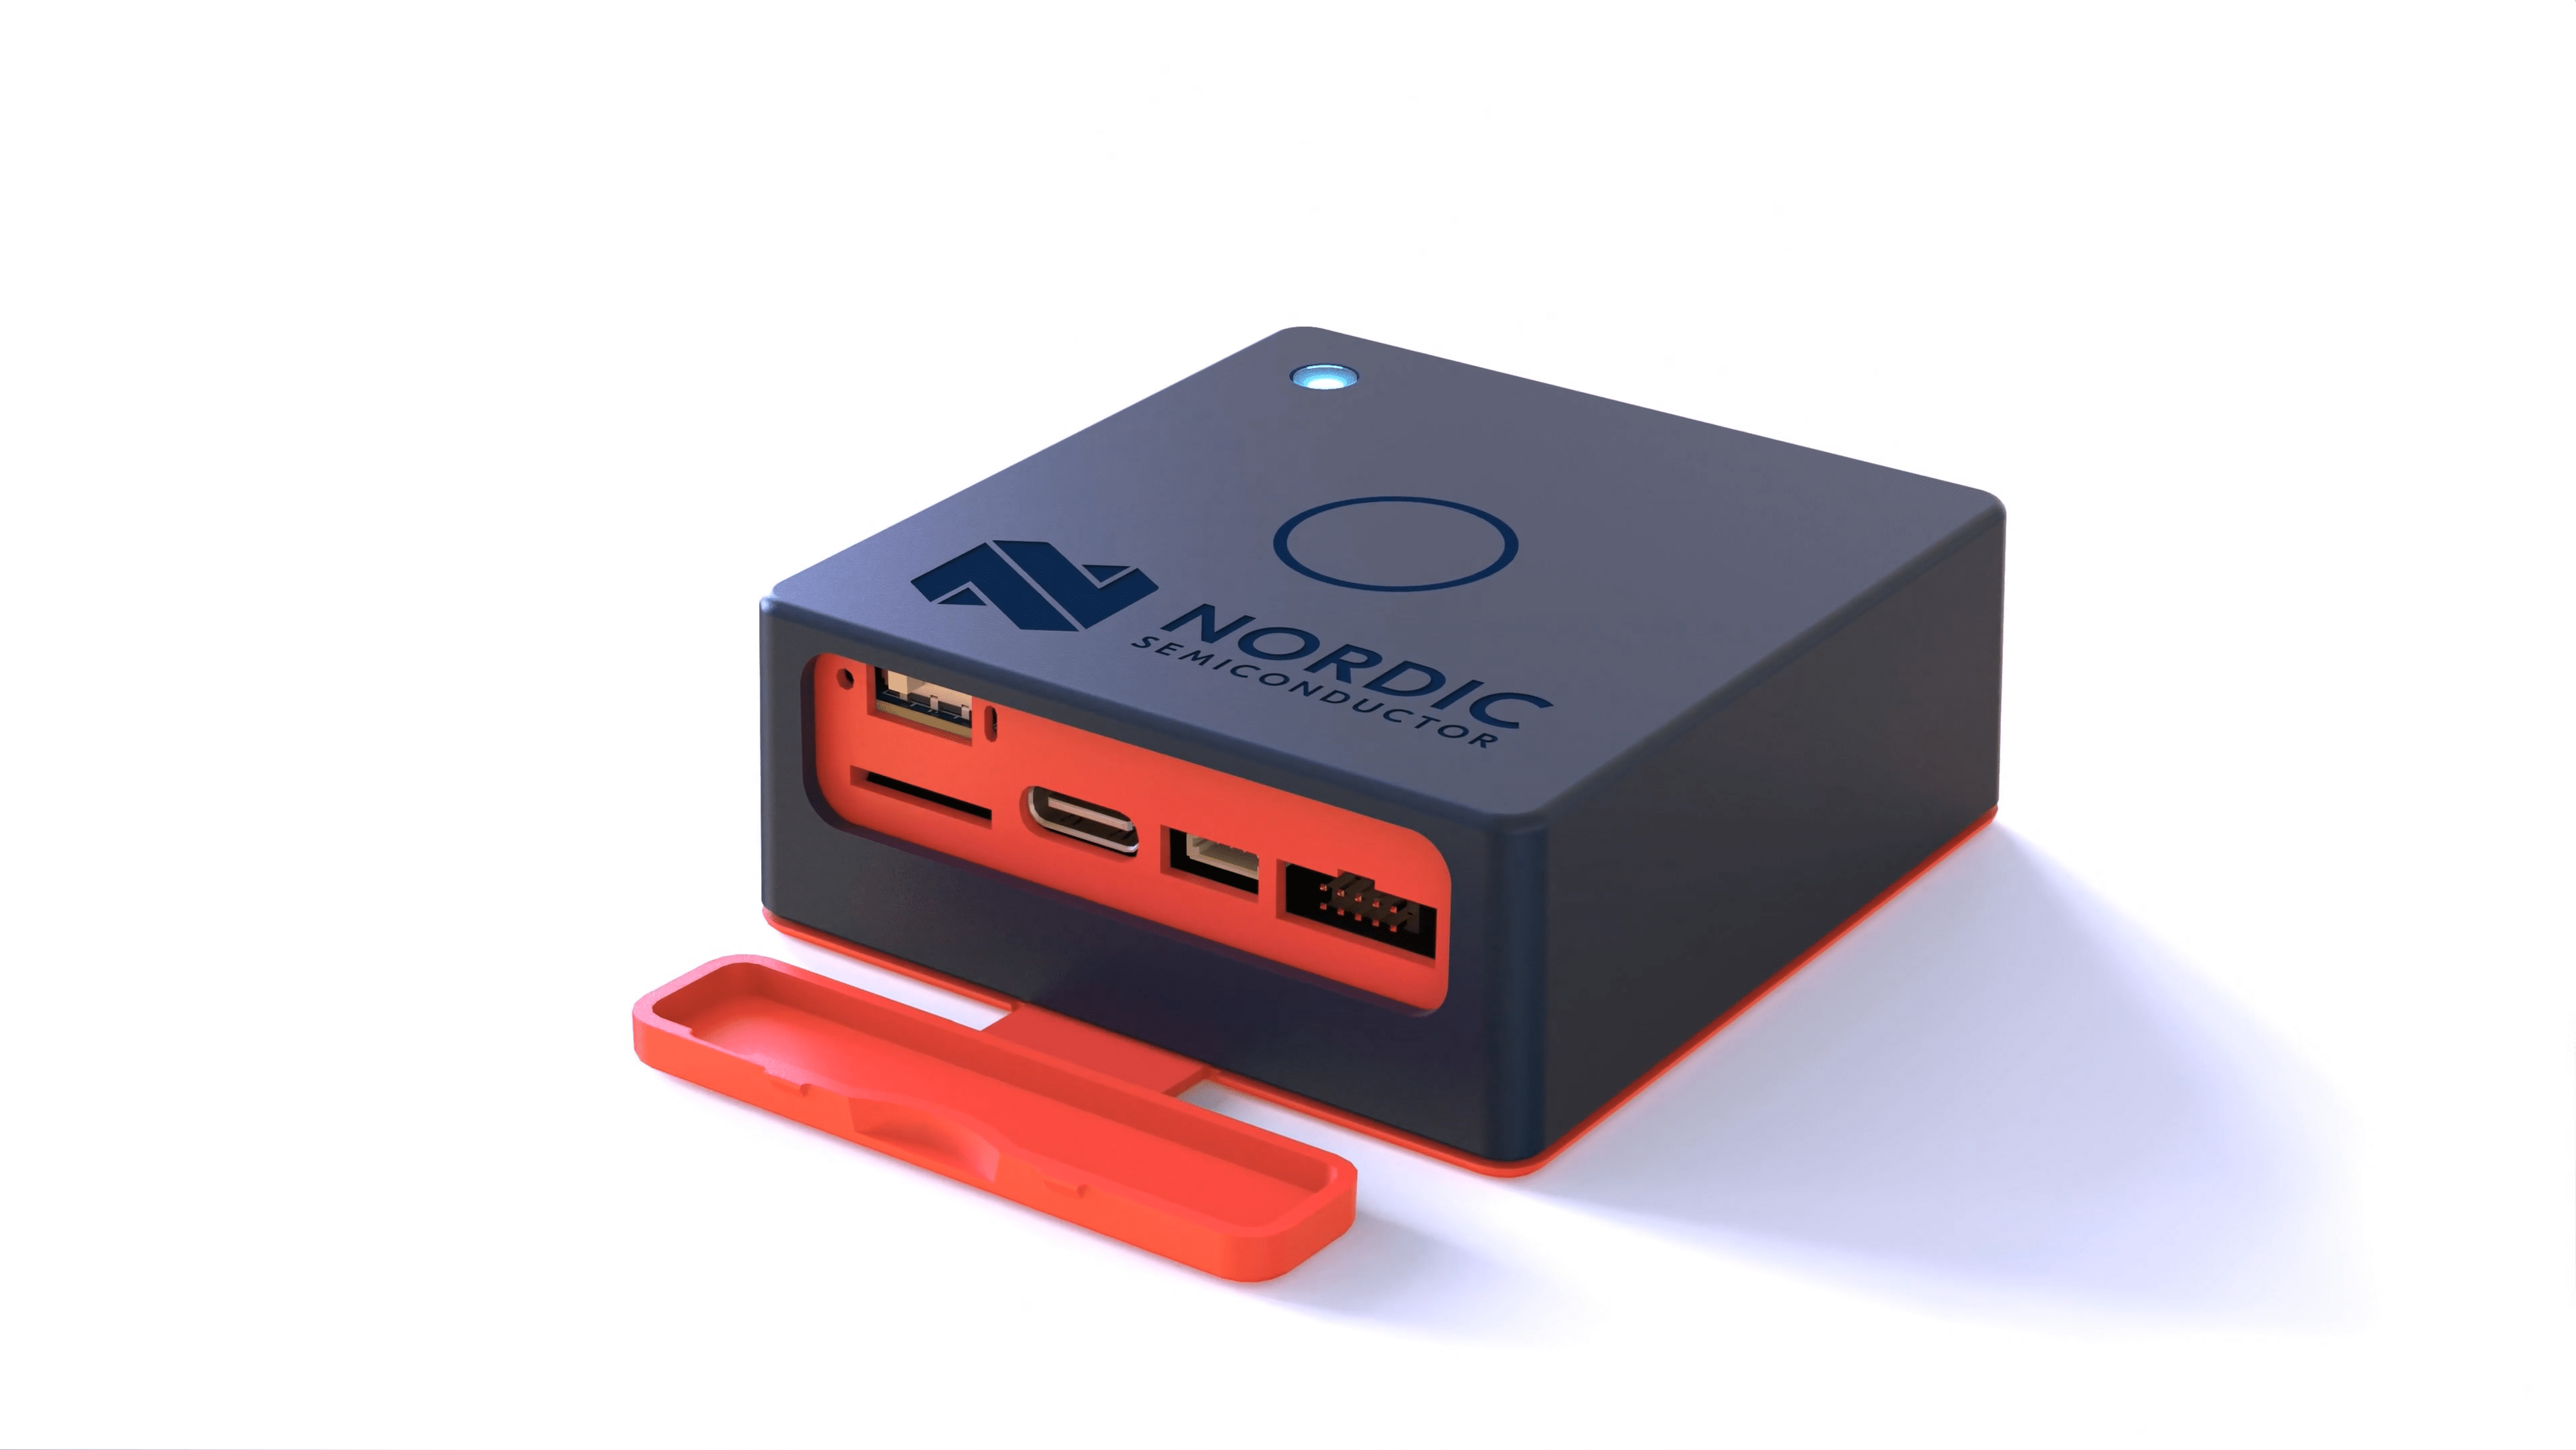 3D render of the Thingy53 with the blue plastic casing and the red door open showing the on/off-switch and the external connectors